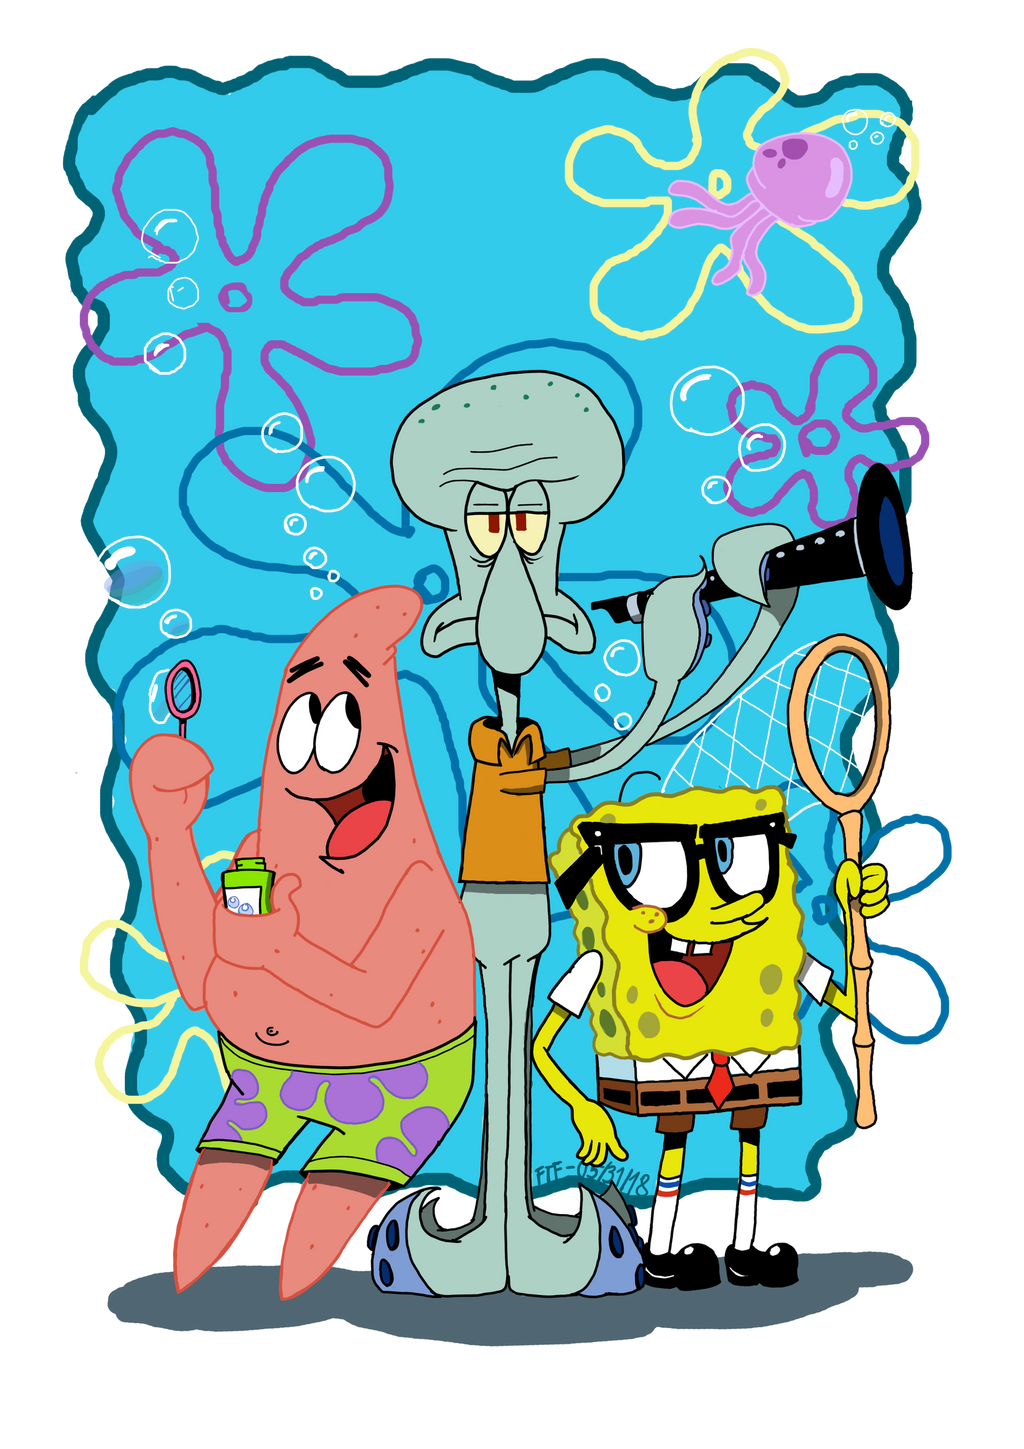 spongebob__patrick_and_squiward_by_ftftheadvancetoonist_dcd33ex-fullview.png